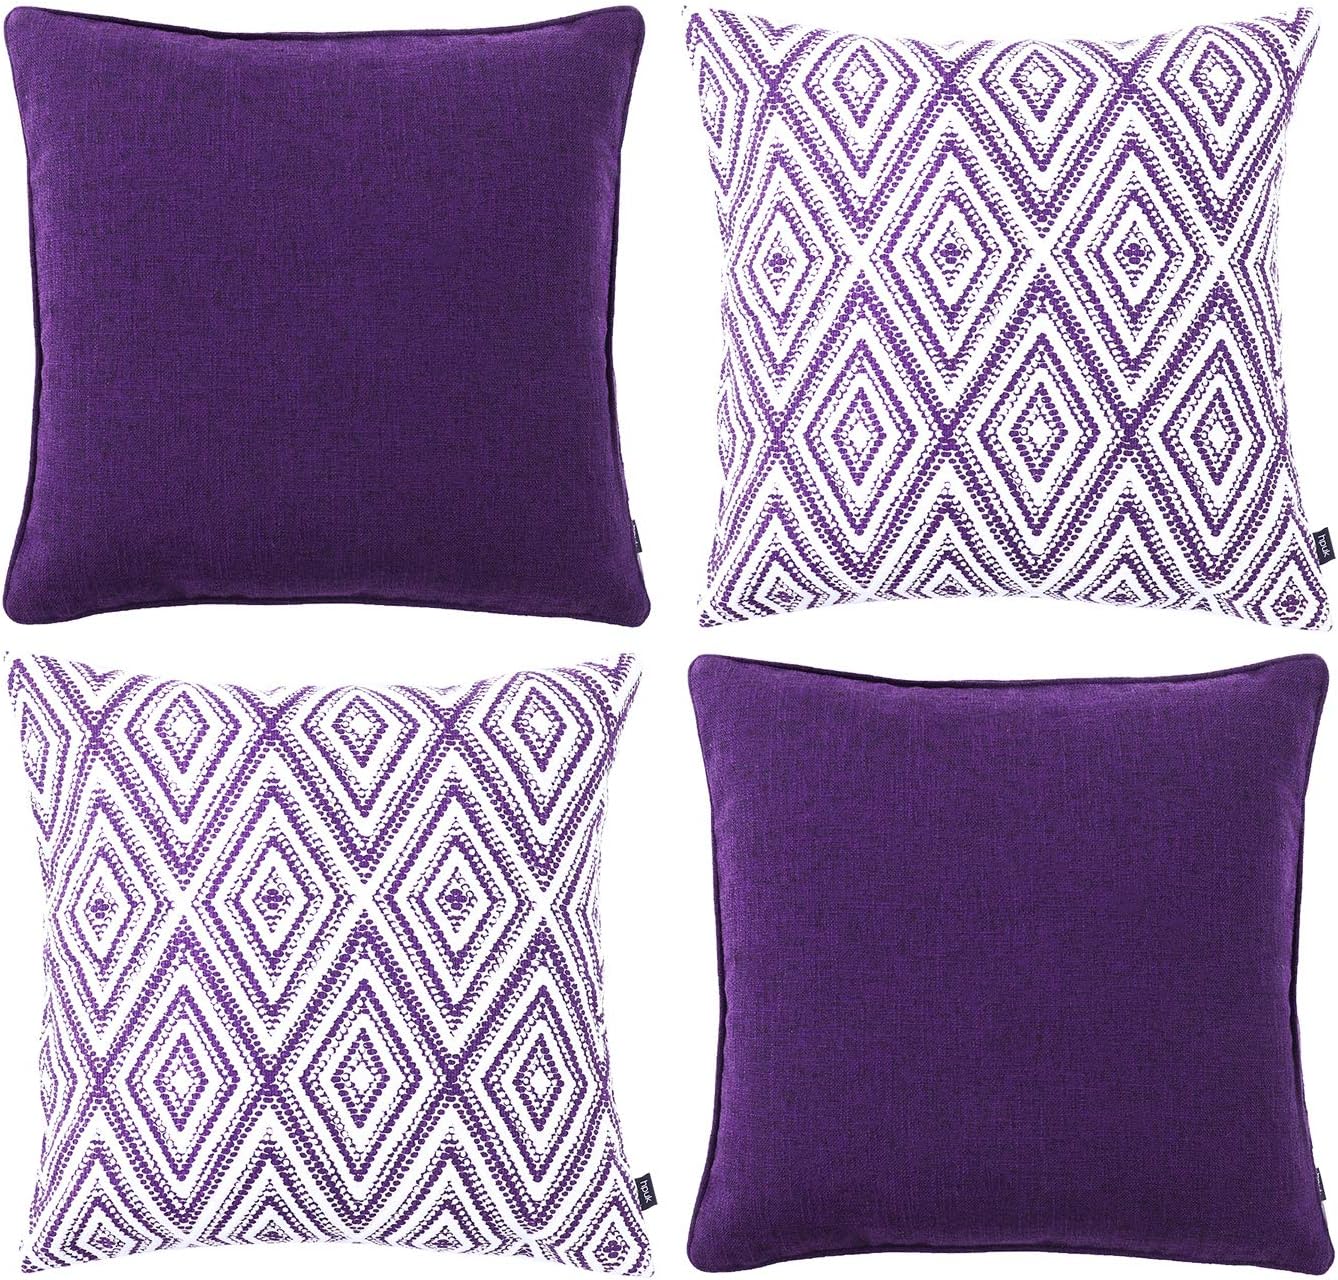 HPUK Decorative Throw Pillow Covers Set of 4 Couch Pillows Linen Cushion Cover for Couch Sofa Living Room, 18x18 inches, Dark Purple